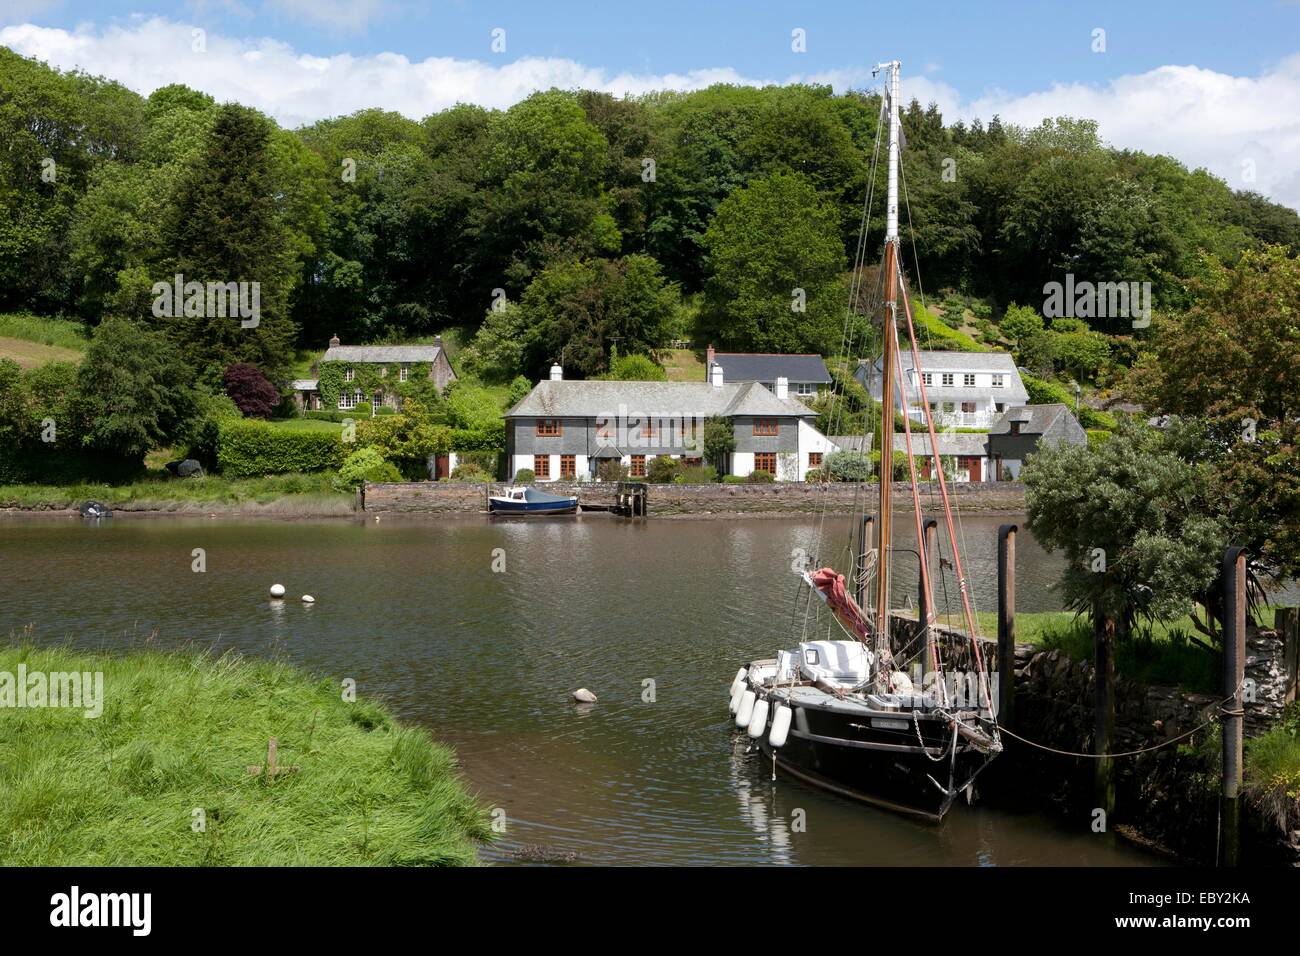 A early summers day at the Cornish Riverside Village of Lerryn beside the River Lerryn which flows into the sea at Fowey. Stock Photo